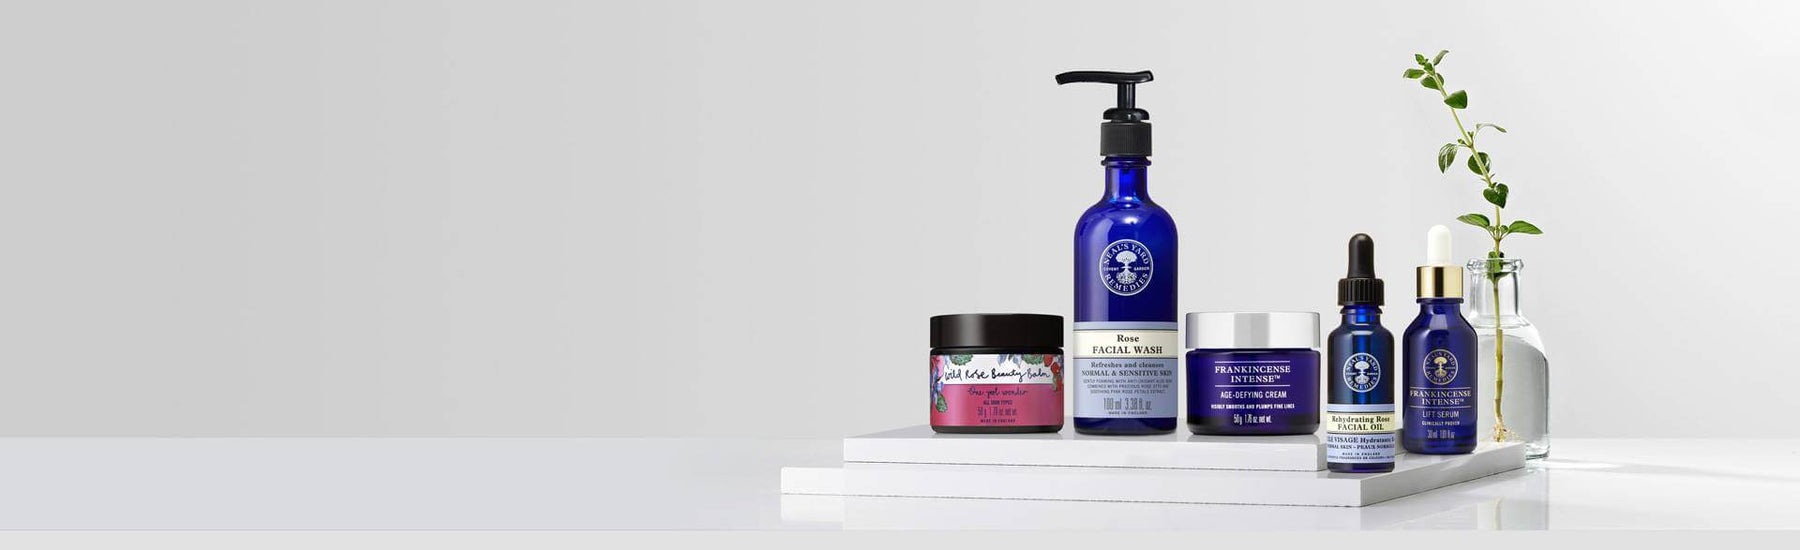 Picture of organic skincare bestseller products by Neal's yard Remedies